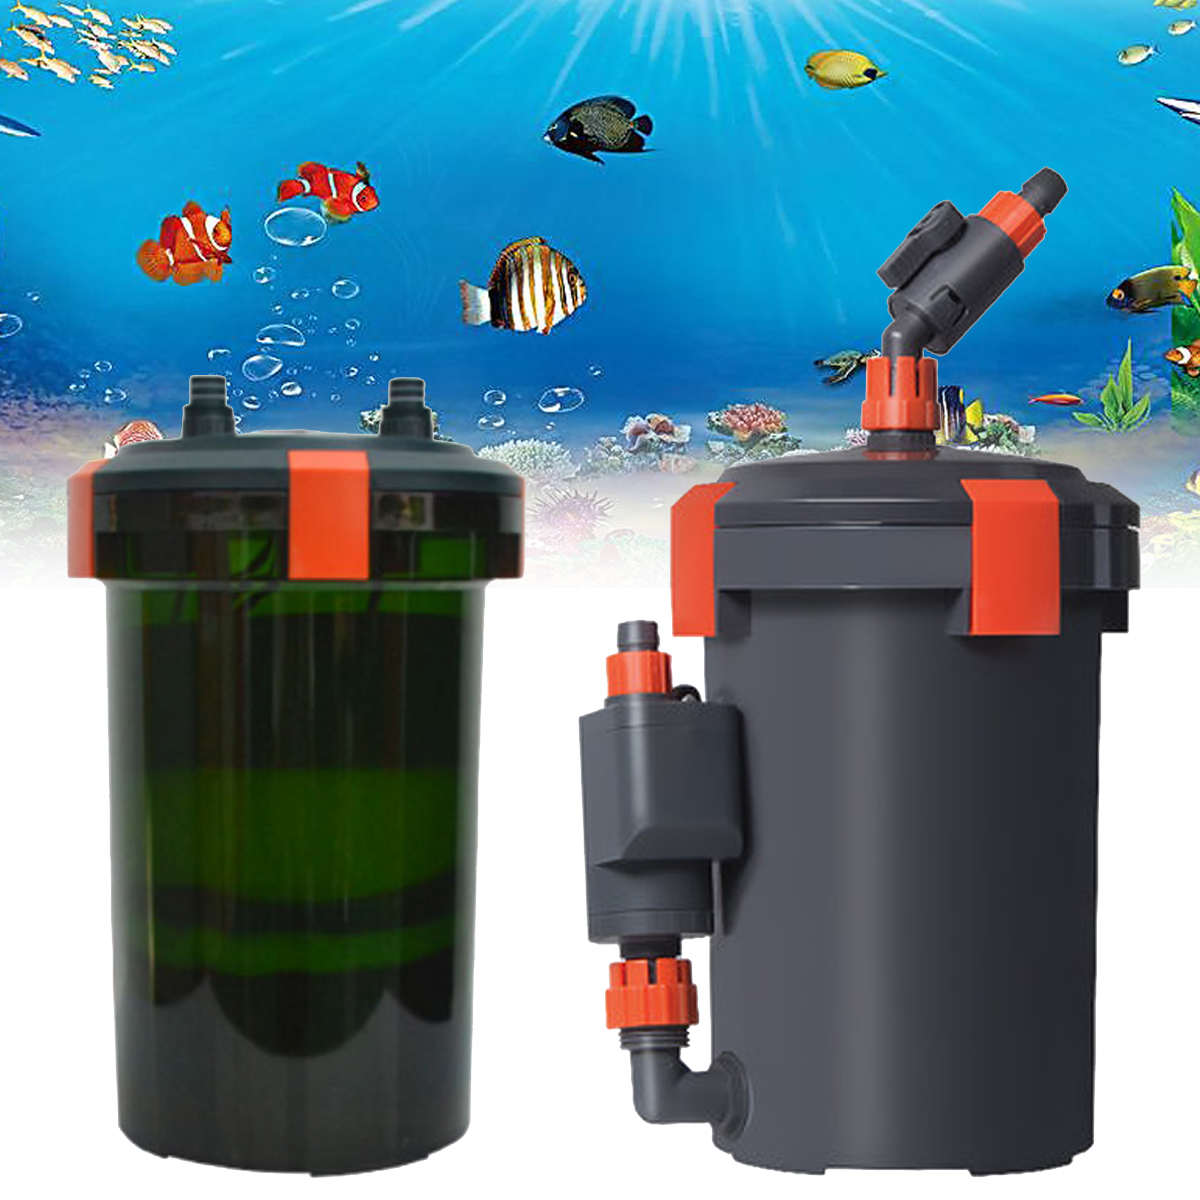 

6-25W 450-800L/H Aquarium Fish Tank External Canister Filter with Filter Cotton